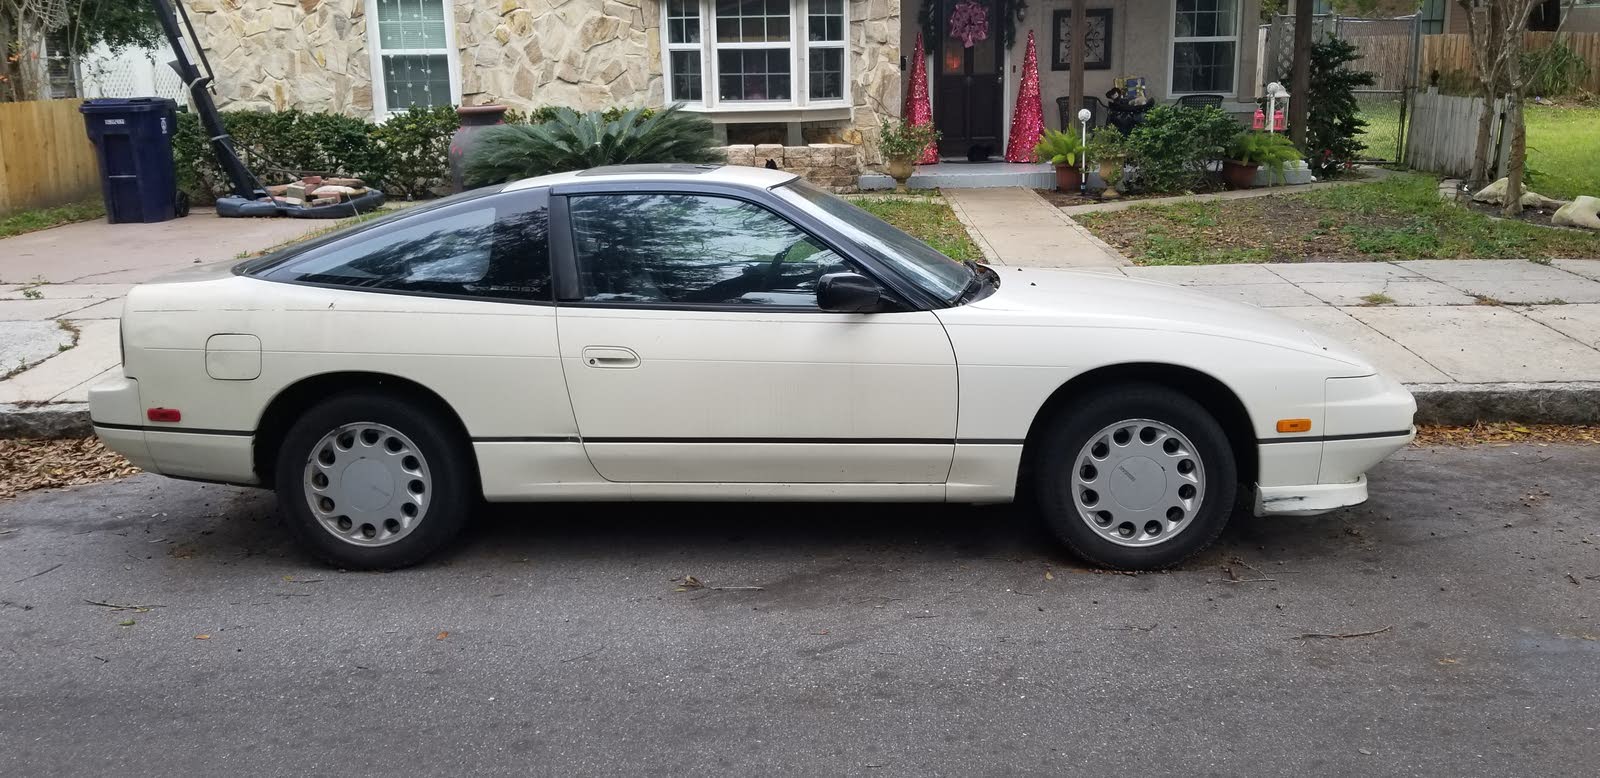 Nissan 240sx Questions Price On 89 240sx Cargurus